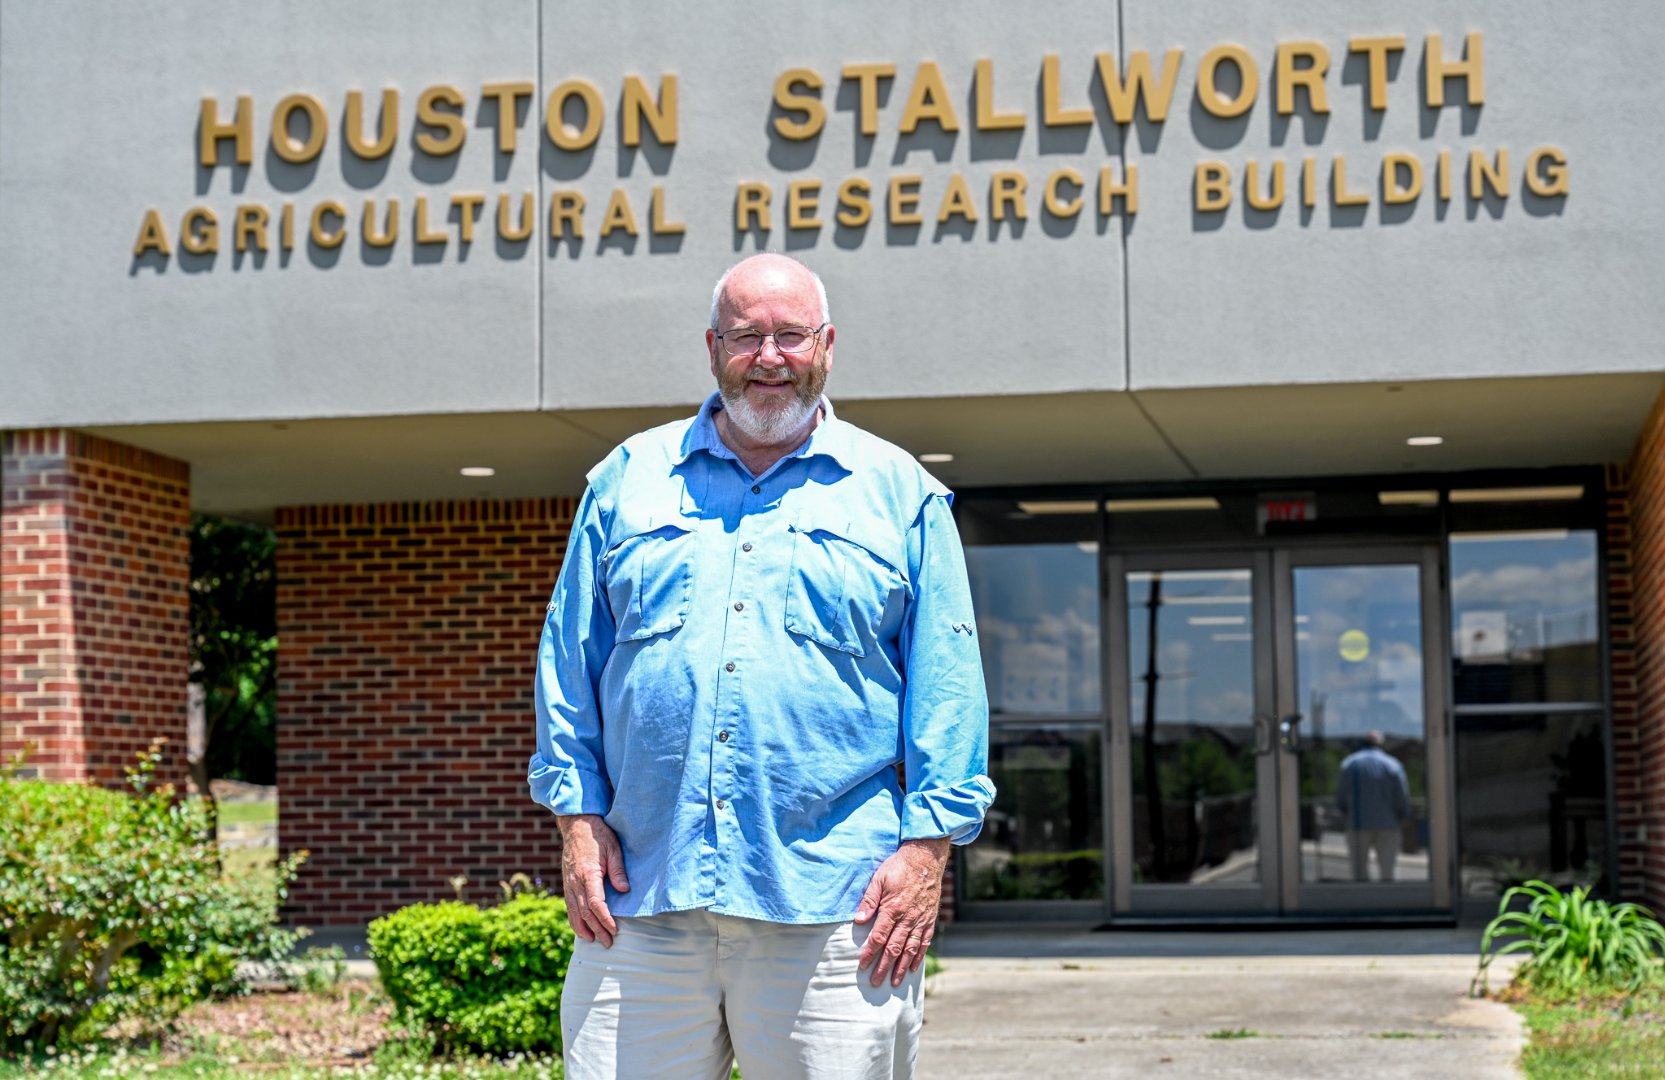 Dr. Thomas Terrill, a Fort Valley State University professor of animal science, is ranked No. 654 in the world and No. 225 in the nation in animal science and veterinary research by Research.com.